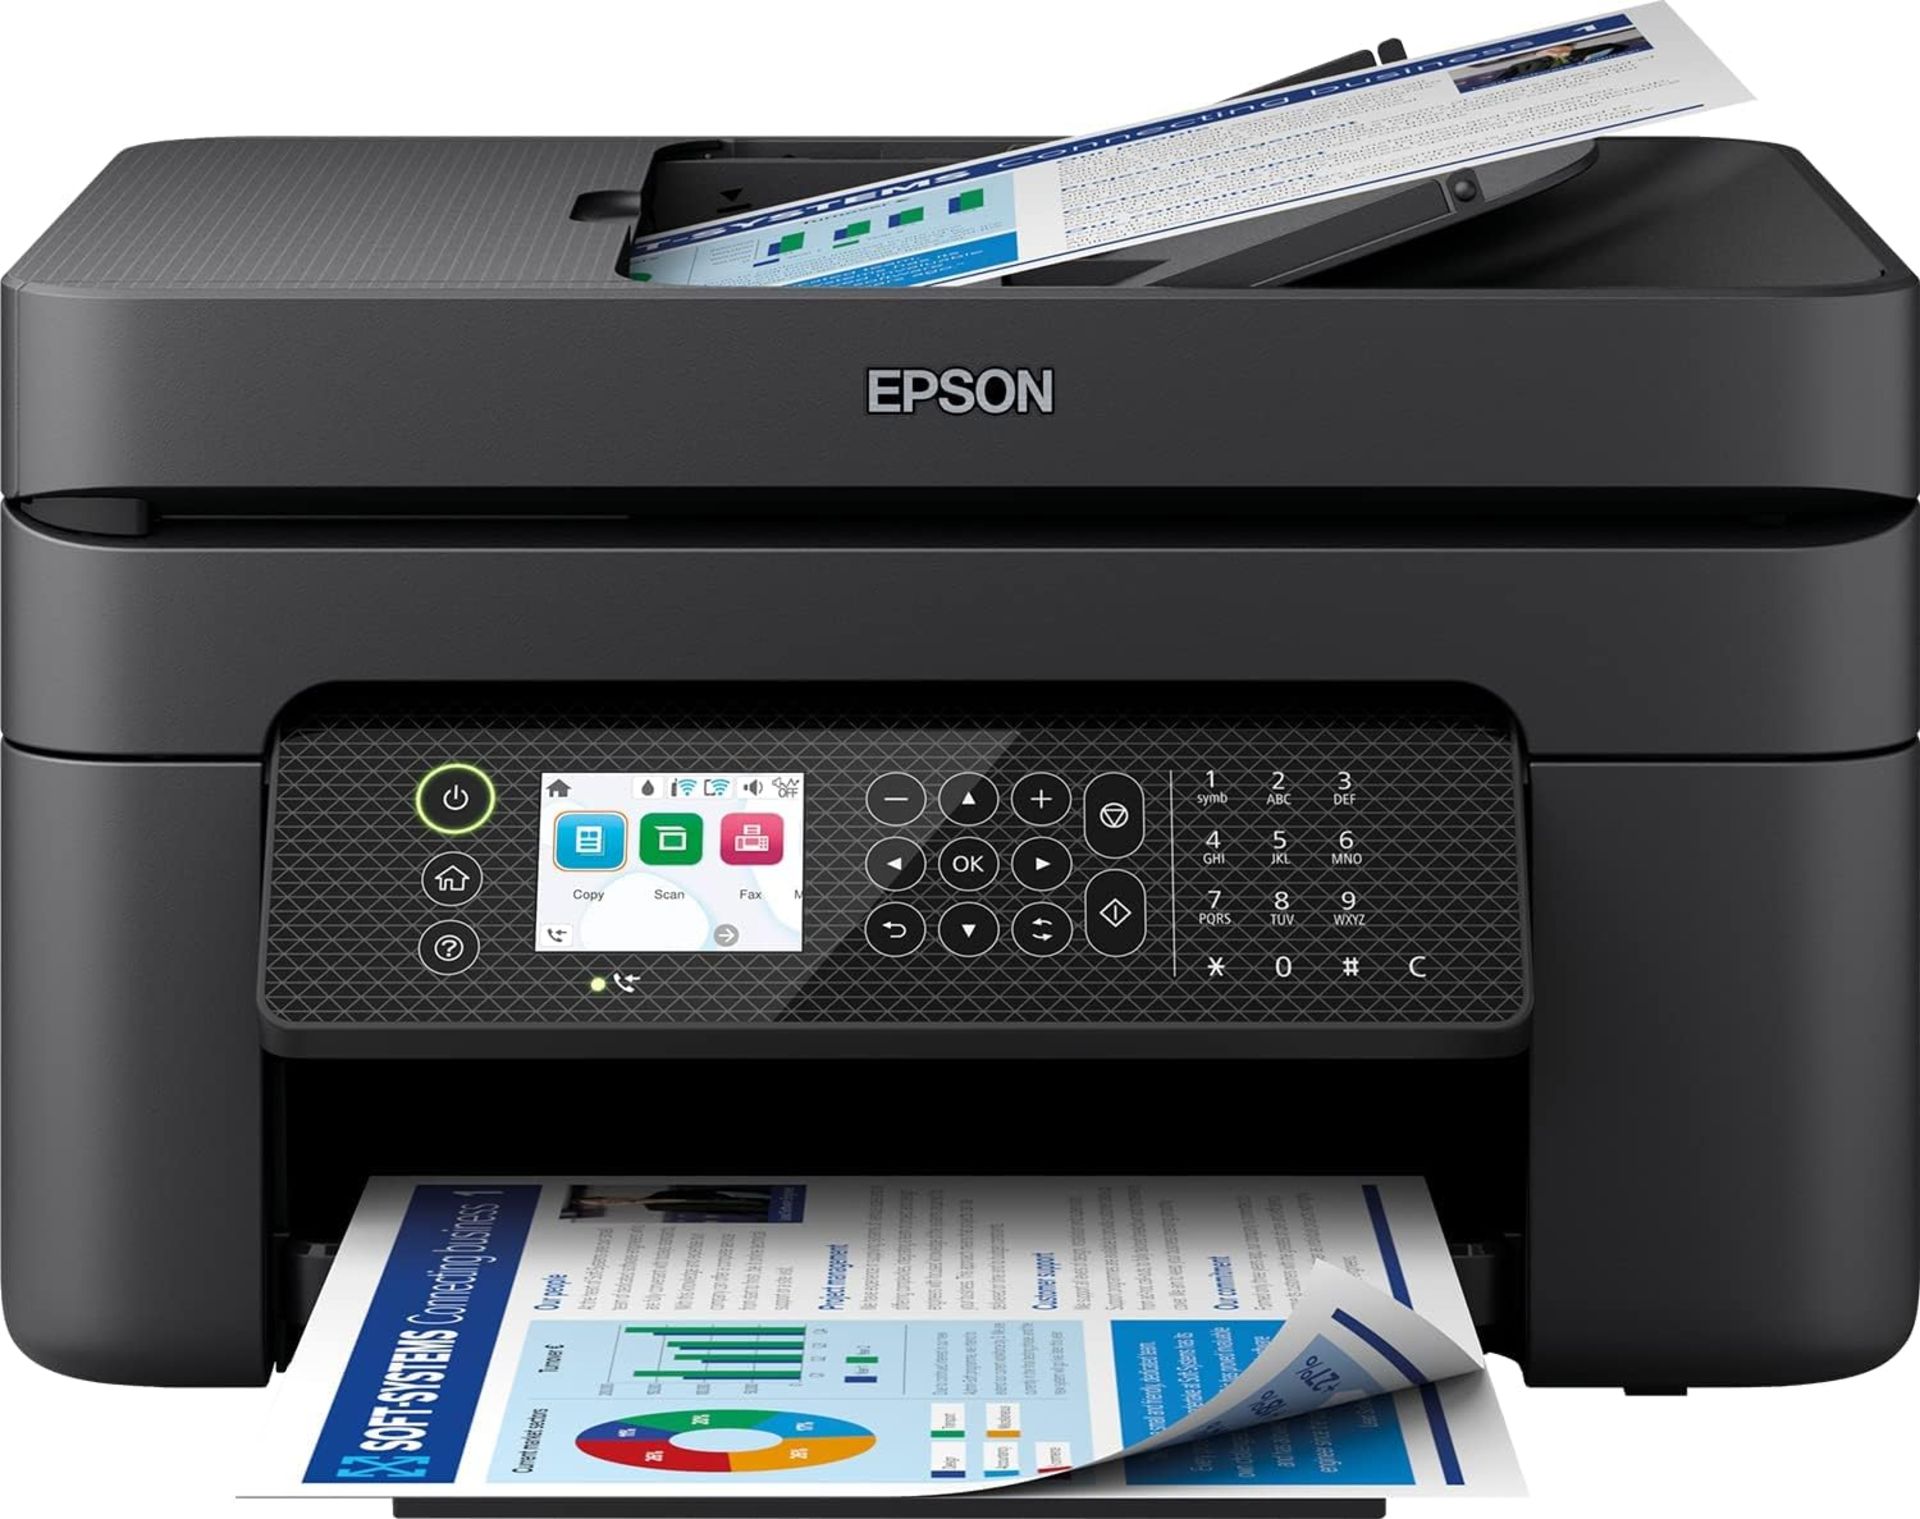 EPSON WF-2950DWF A4 Multifunction Wireless Inkjet Printer. RRP £99.99. (R6R). COMPACT AND